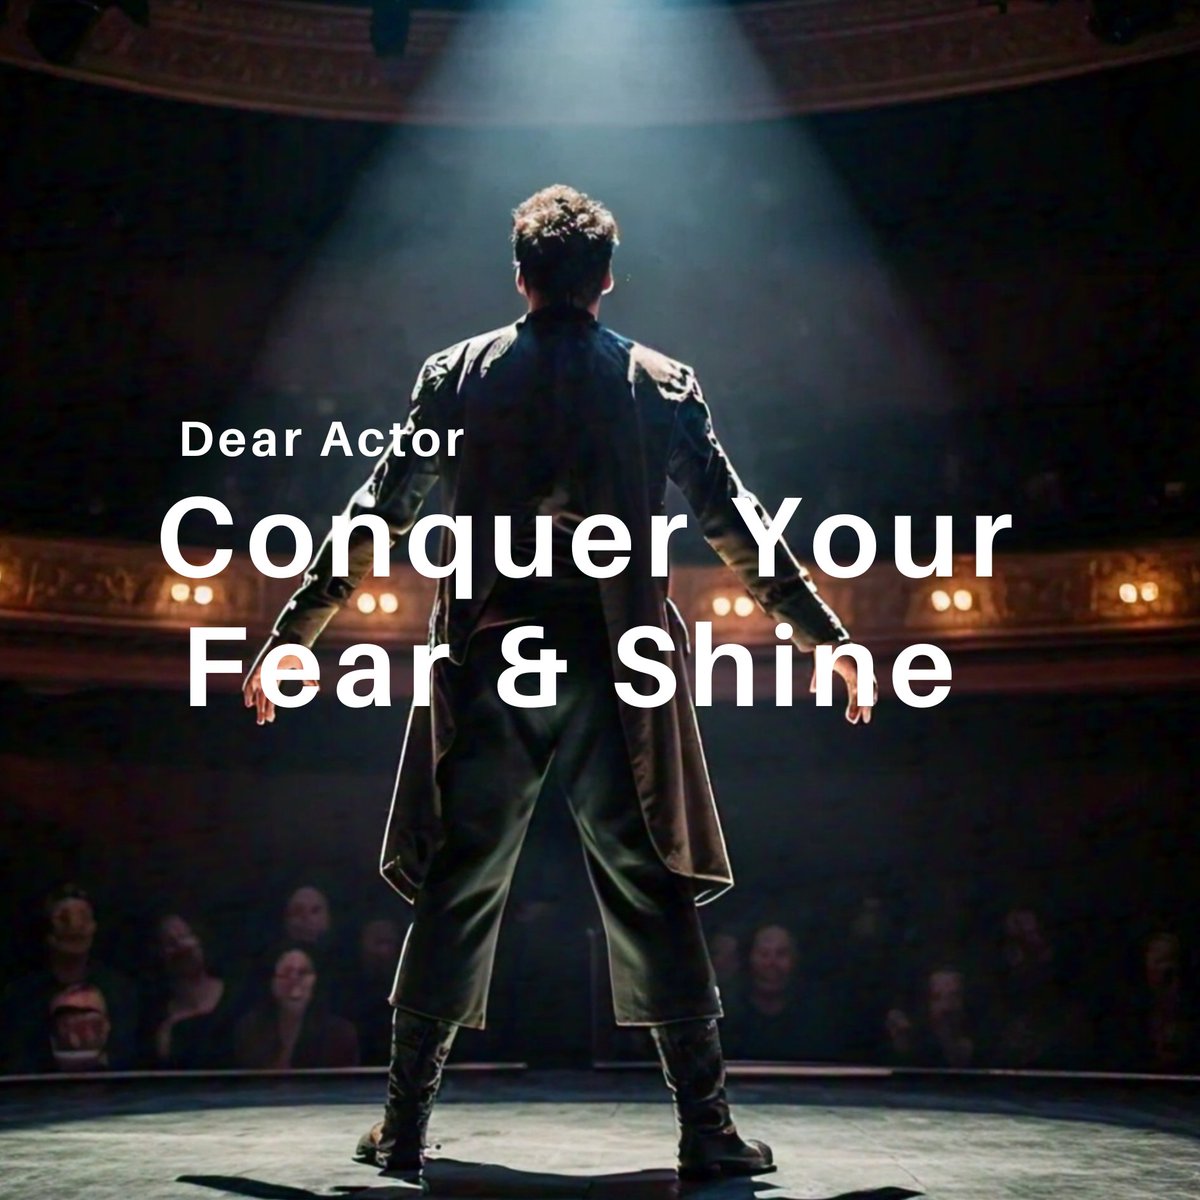 Stage fright?  Don't sweat it! 
Rehearse like a pro!  Confidence comes from knowing your lines.
Visualize success!  See yourself captivating the audience.
Positive self-talk! Replace 'what ifs' with 'I got this!'
Everyone gets stage fright; prep & belief, you'll shine #actingtips